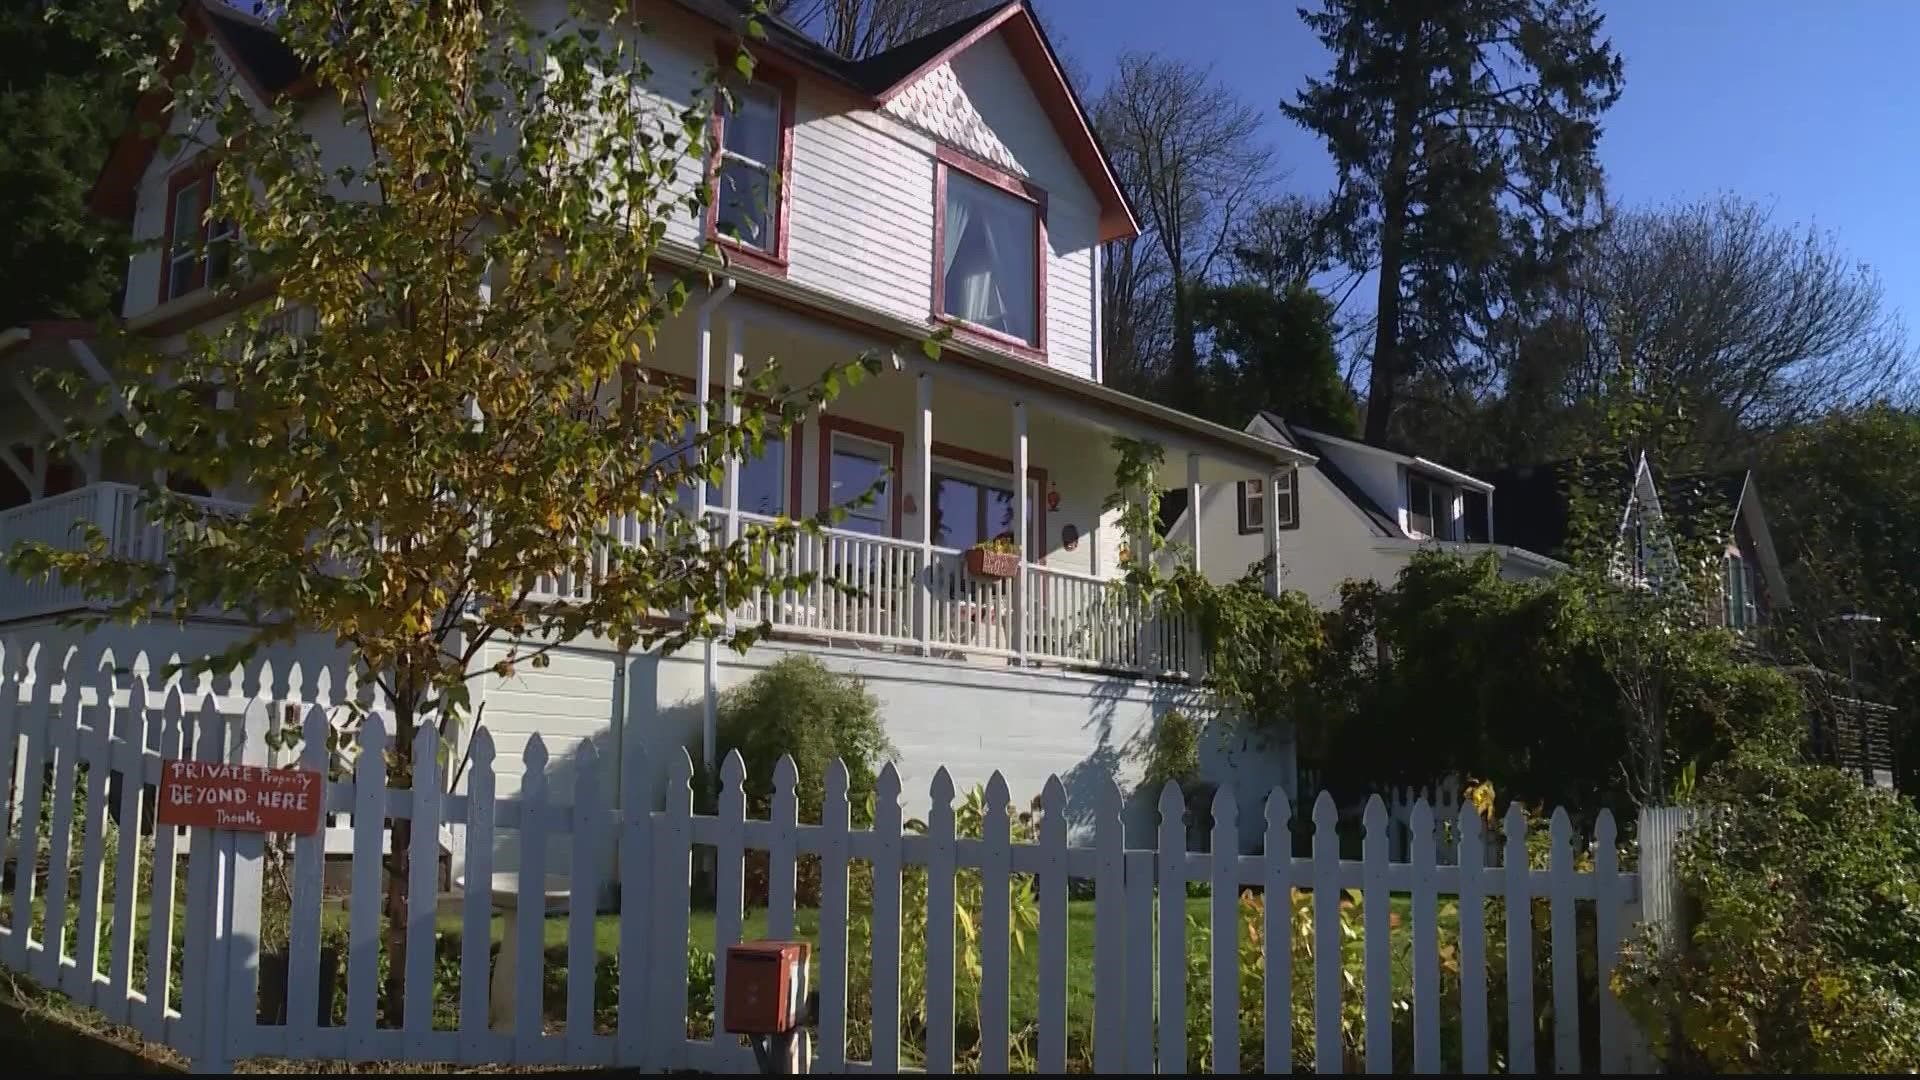 A piece of Astoria history, the "Goonies" house, is up for sale. The house where the 1985 film was made can be yours for $1.6 million.